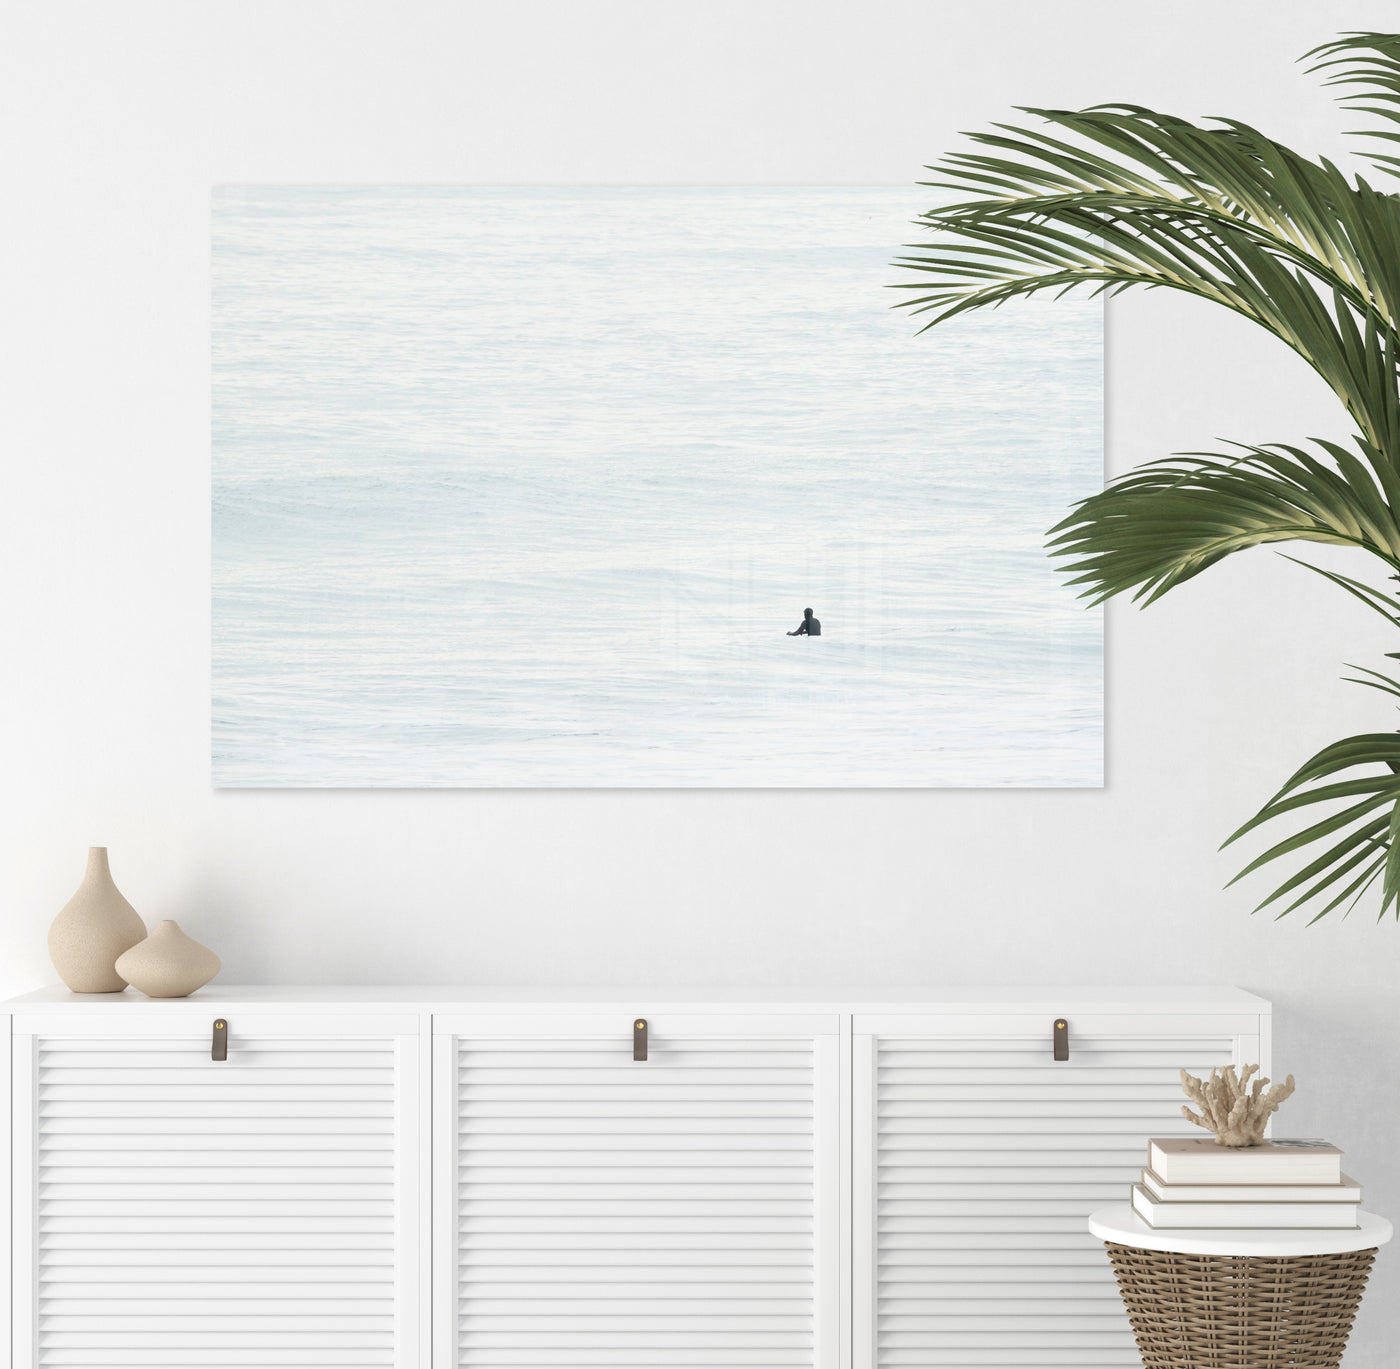 Surfer No 6 - Acrylic glass print by Cattie Coyle Photography above dresser